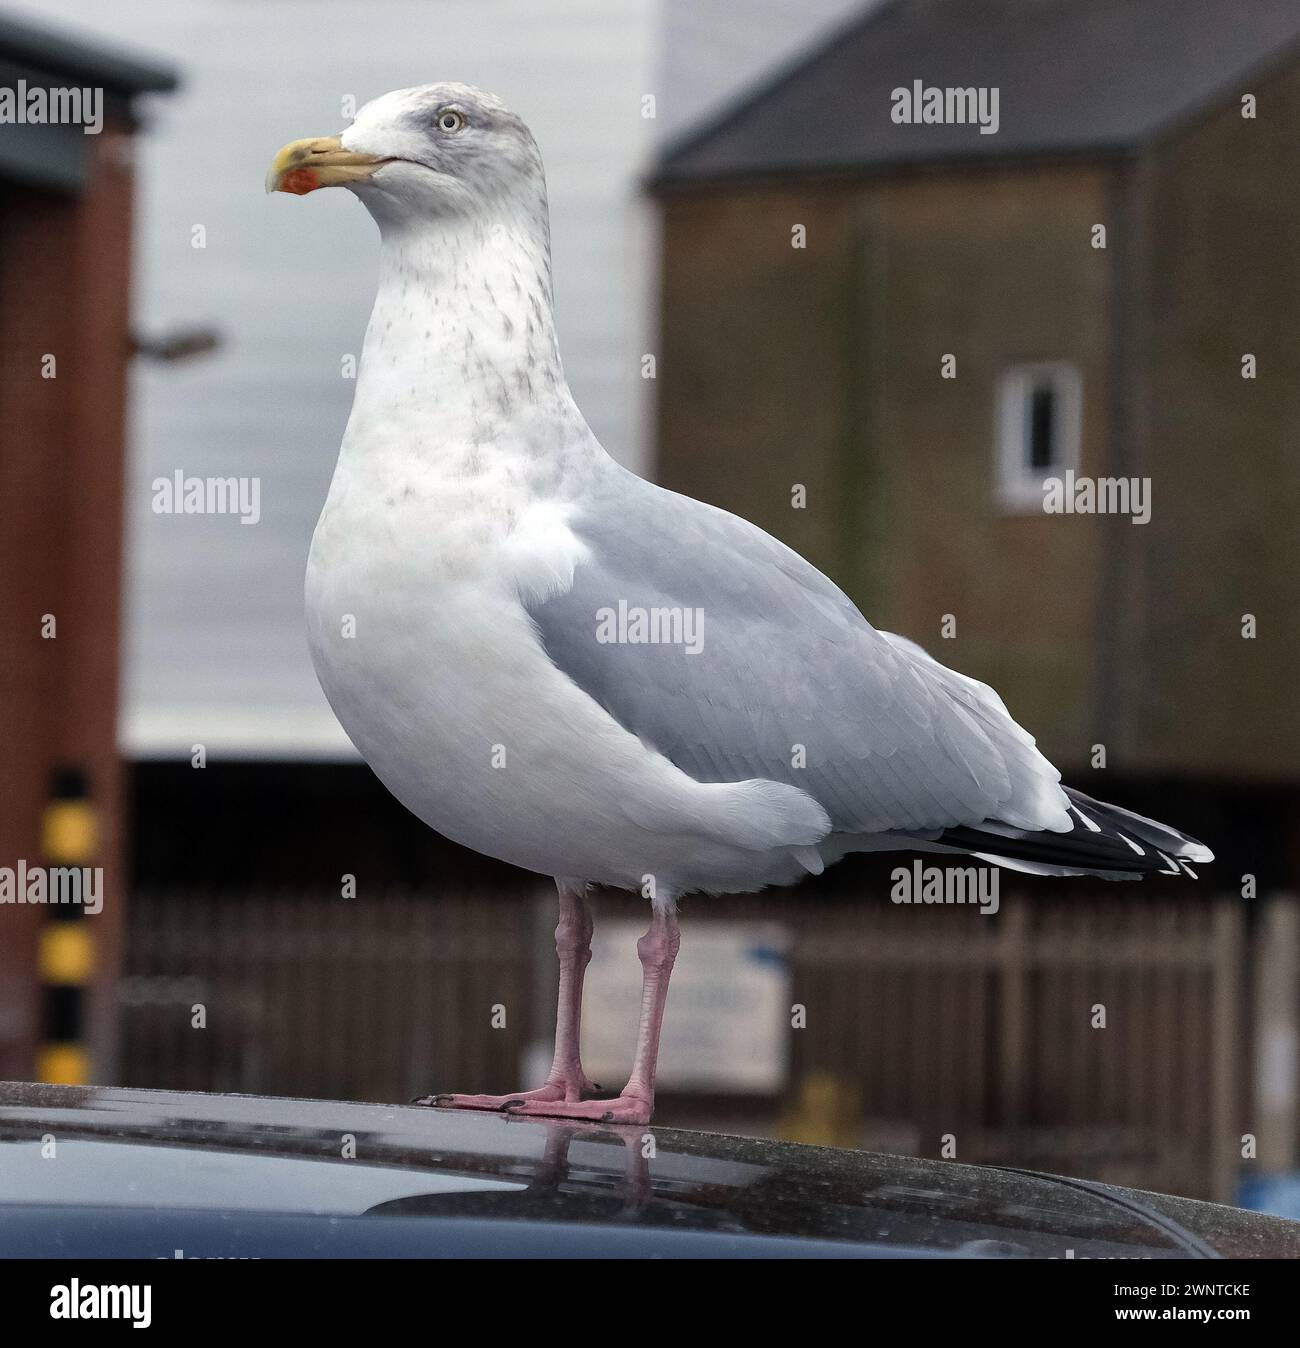 The European herring gull is a large gull, up to 66 cm long. Common in coastal regions of Western Europe, it was historically more abundant. Stock Photo